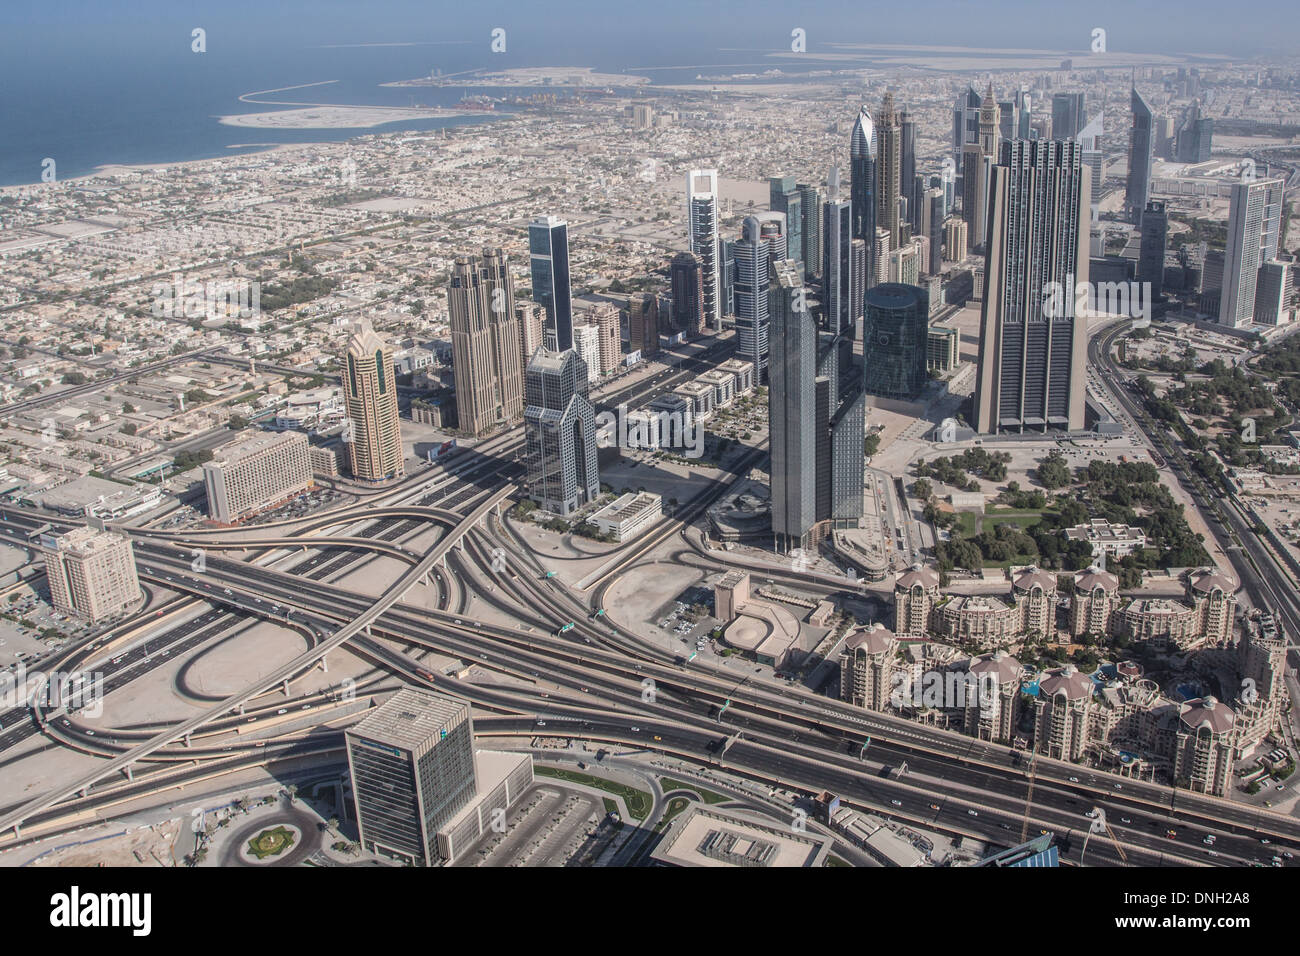 SHOT OF THE FINANCIAL CENTER AND SHEIKH ZAYED ROAD FROM THE OBSERVATORY IN THE BURJ KHALIFA TOWER, ONCE CALLED BURJ DUBAI, VIEW FROM THE THE HIGHEST TOWER IN THE WORLD (828 METRES), DOWNTOWN DUBAI, DUBAI, UNITED ARAB EMIRATES, MIDDLE EAST Stock Photo